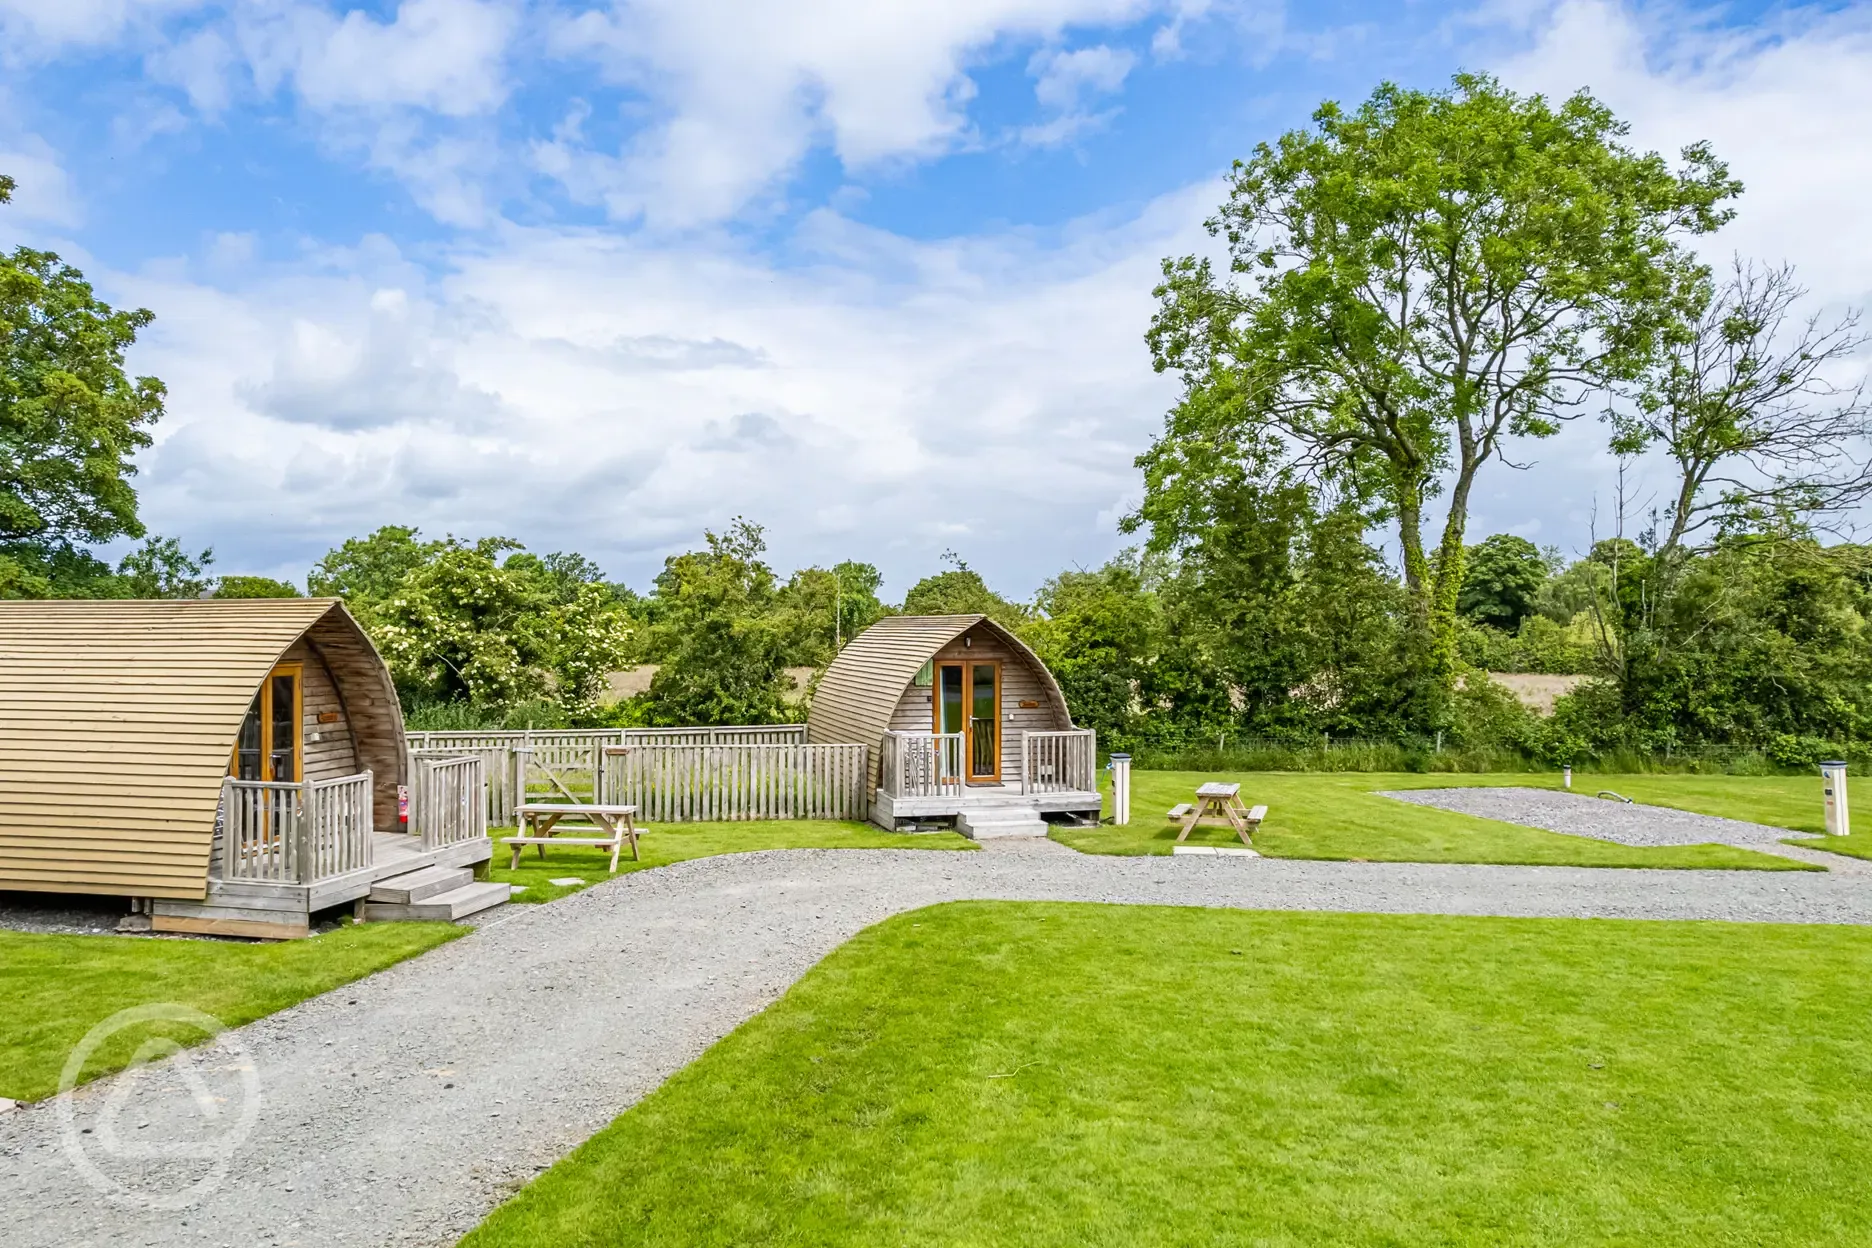 Four person glamping pods